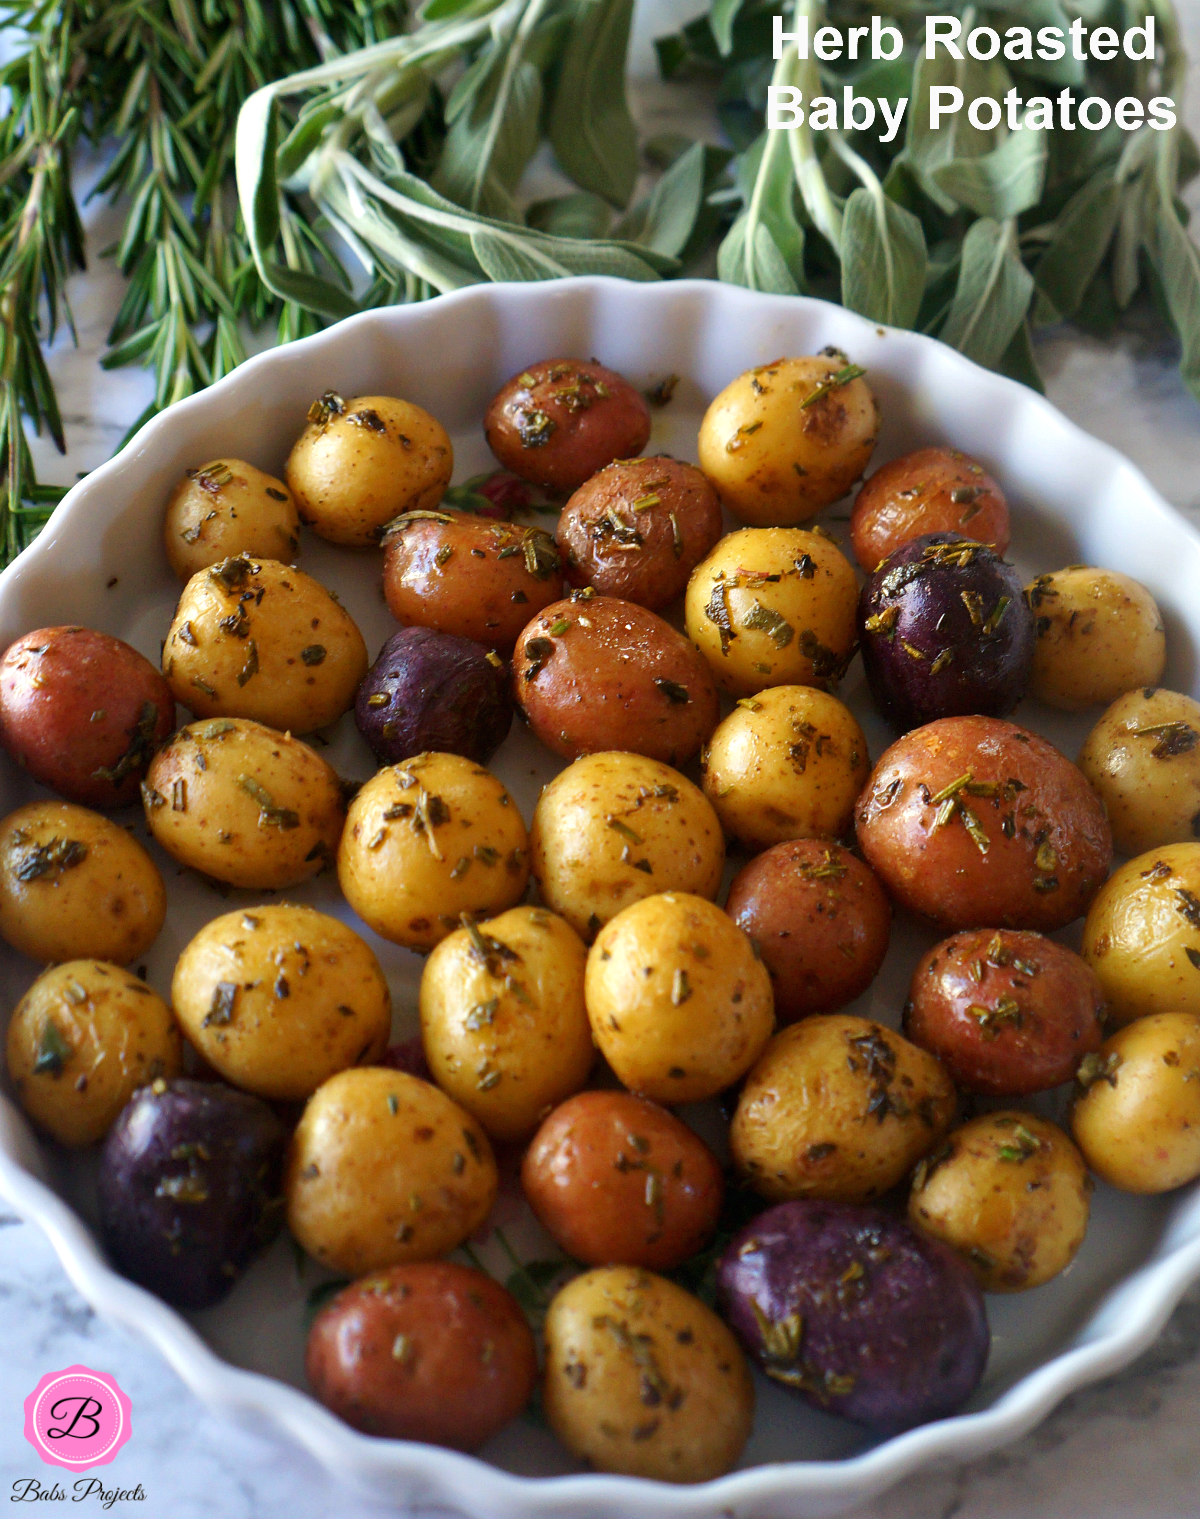 Herb Roasted Baby Potatoes in a Pie Dish Surrounded by Herbs